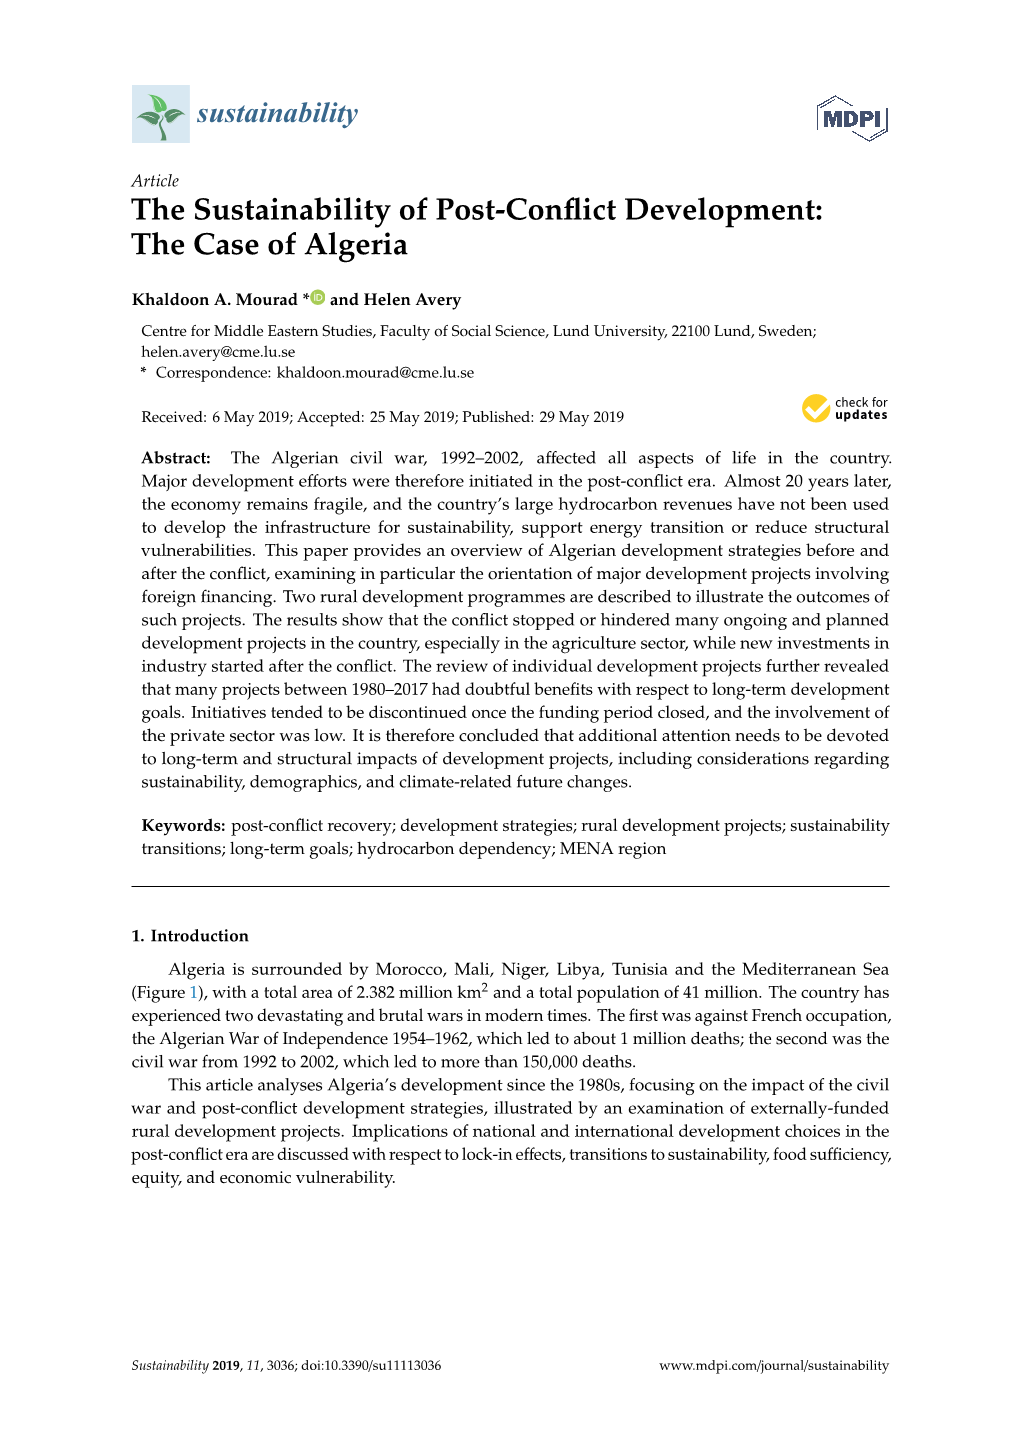 The Sustainability of Post-Conflict Development: the Case of Algeria